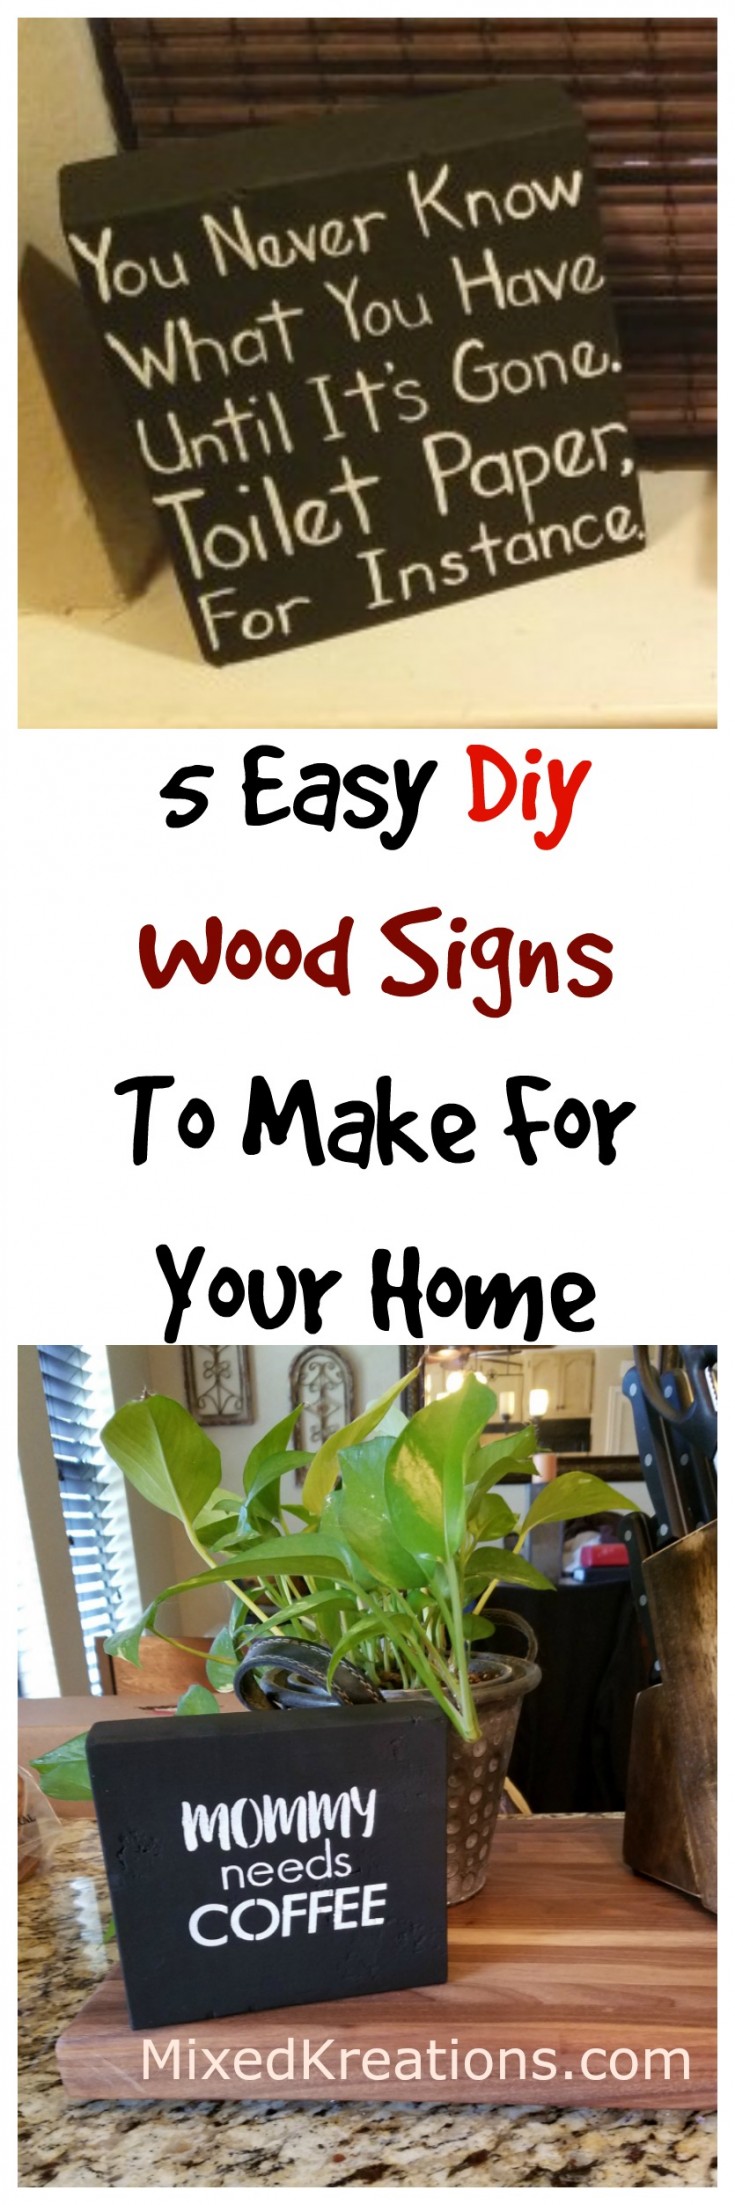 5 easy diy wood signs to make for your home | how to make wood signs #FarmhouseSigns #DiySigns #WoodSigns MixedKreations.com